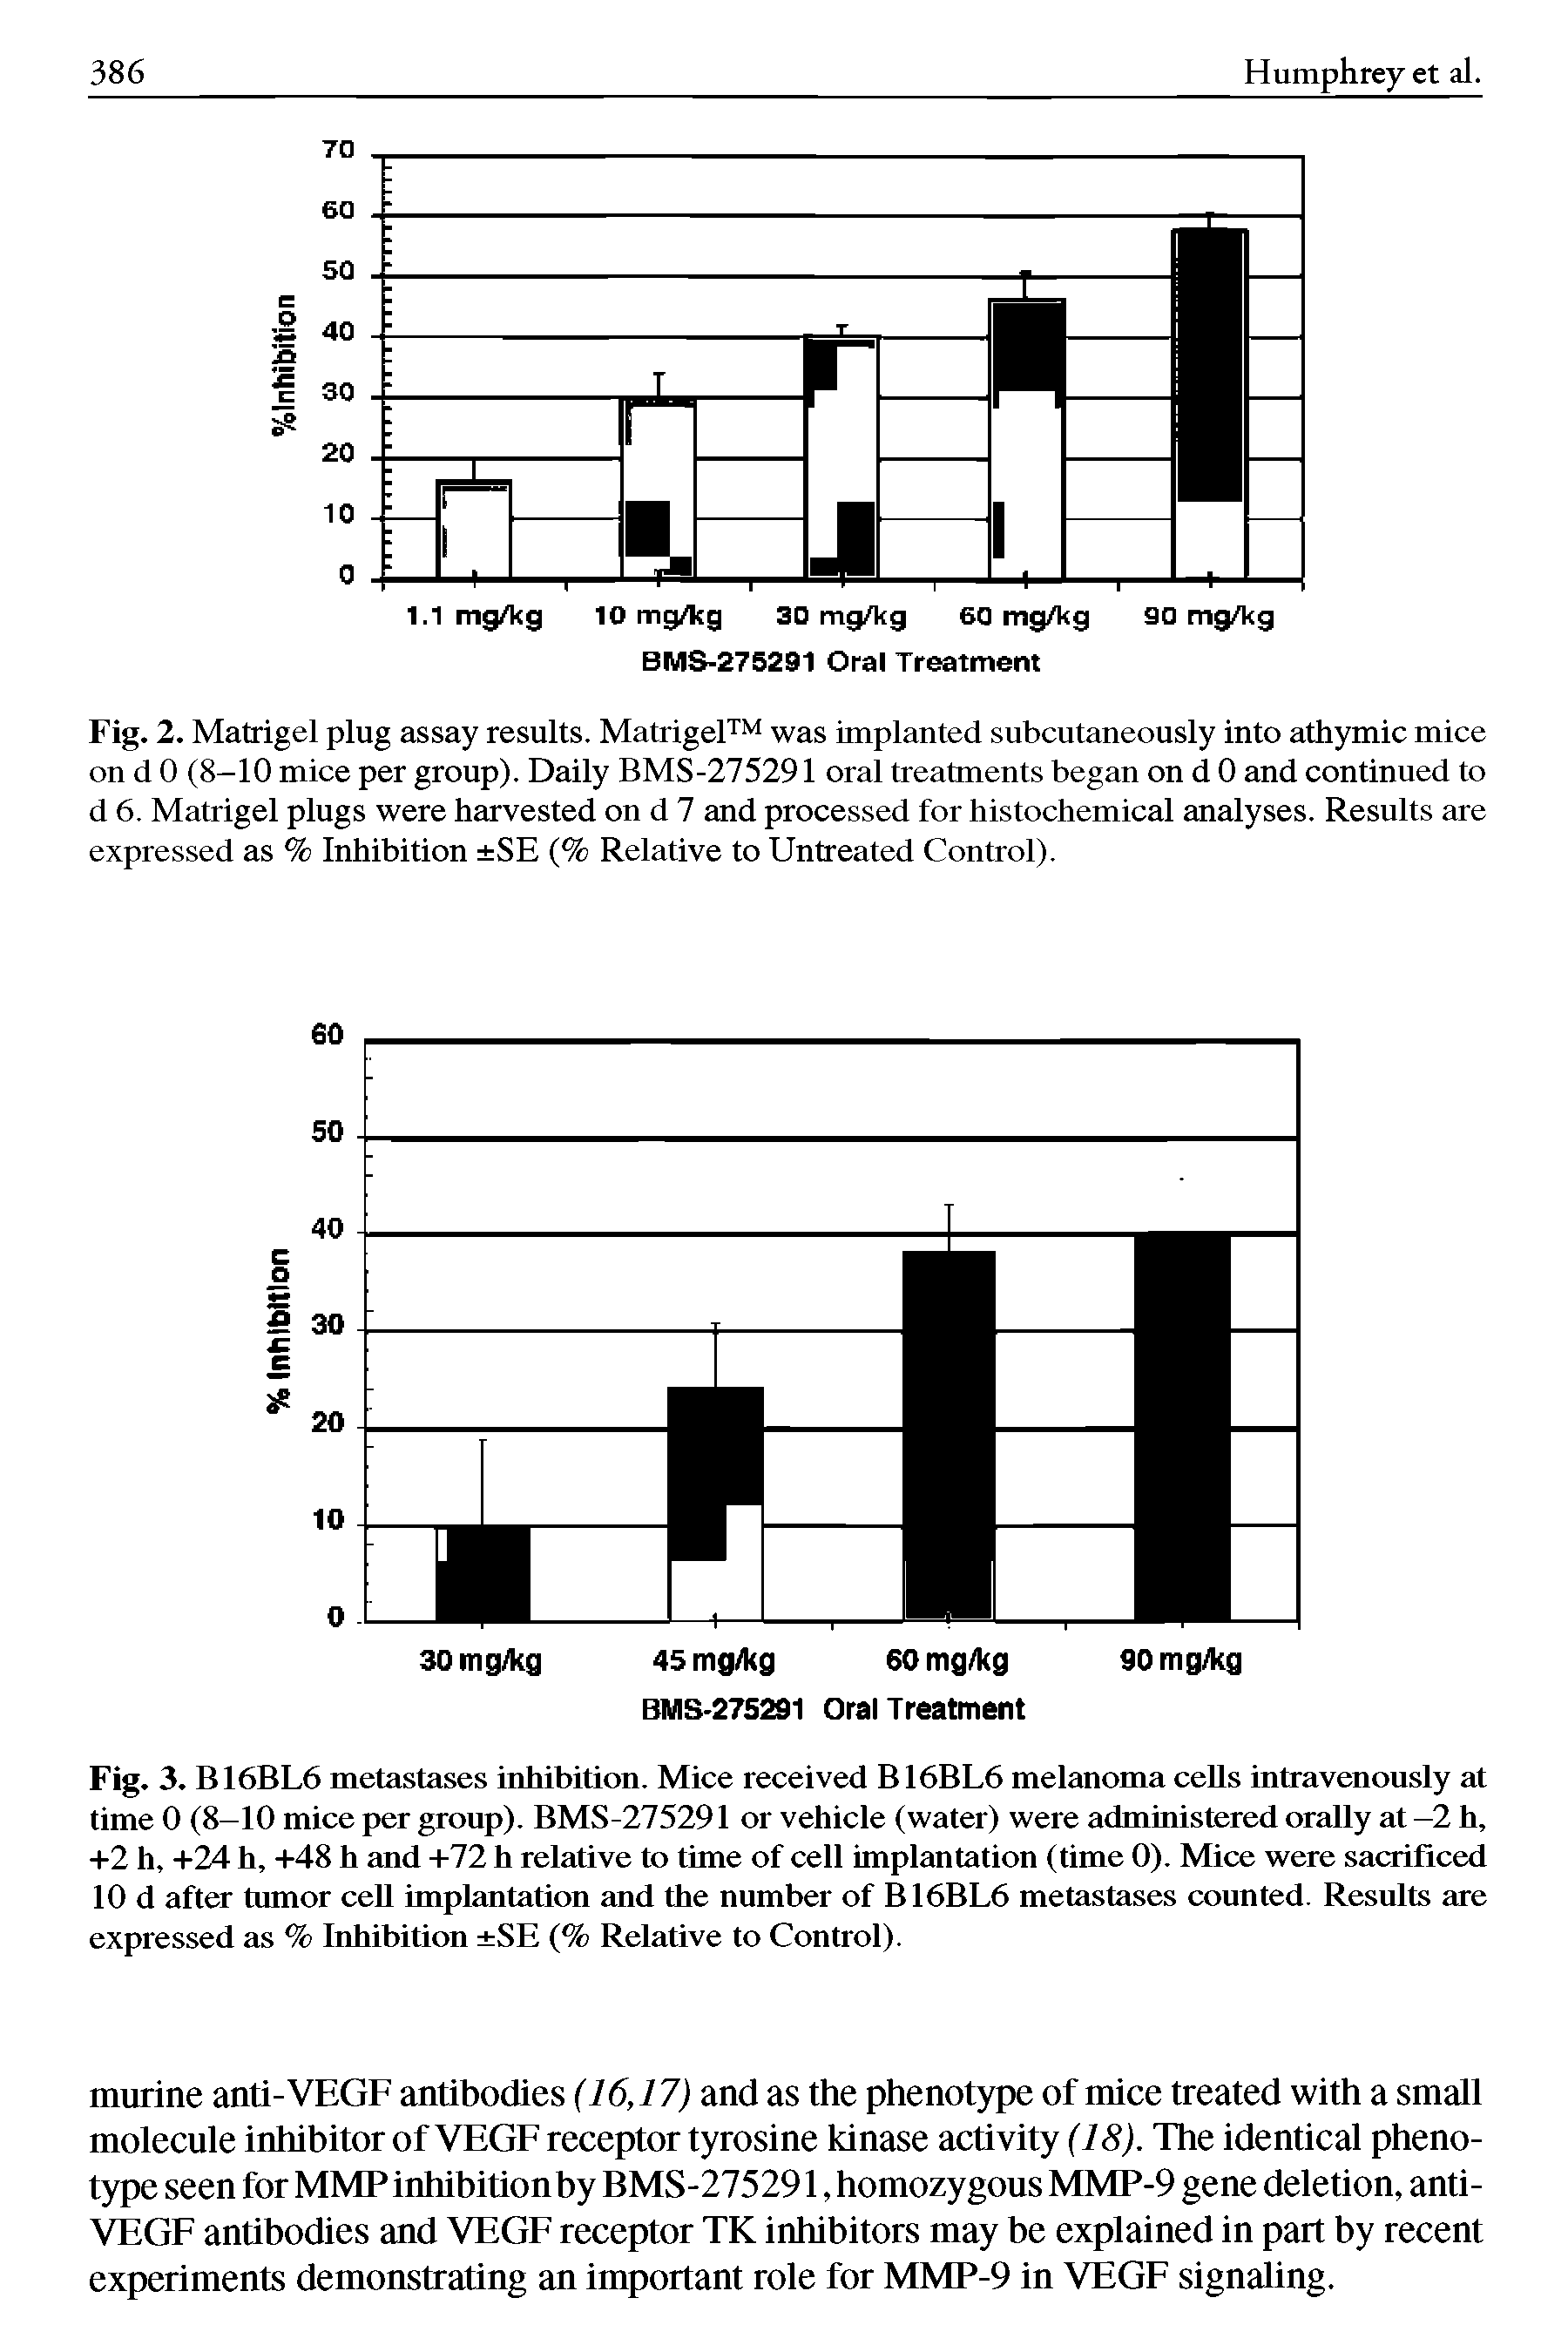 Fig. 2. Matrigel plug assay results. Matrigel was implanted subcutaneously into athymic mice on d 0 (8-10 mice per group). Daily BMS-275291 oral treatments began on d 0 and continued to d 6. Matrigel plugs were harvested on d 7 and processed for histochemical analyses. Results are expressed as % Inhibition SE (% Relative to Untreated Control).